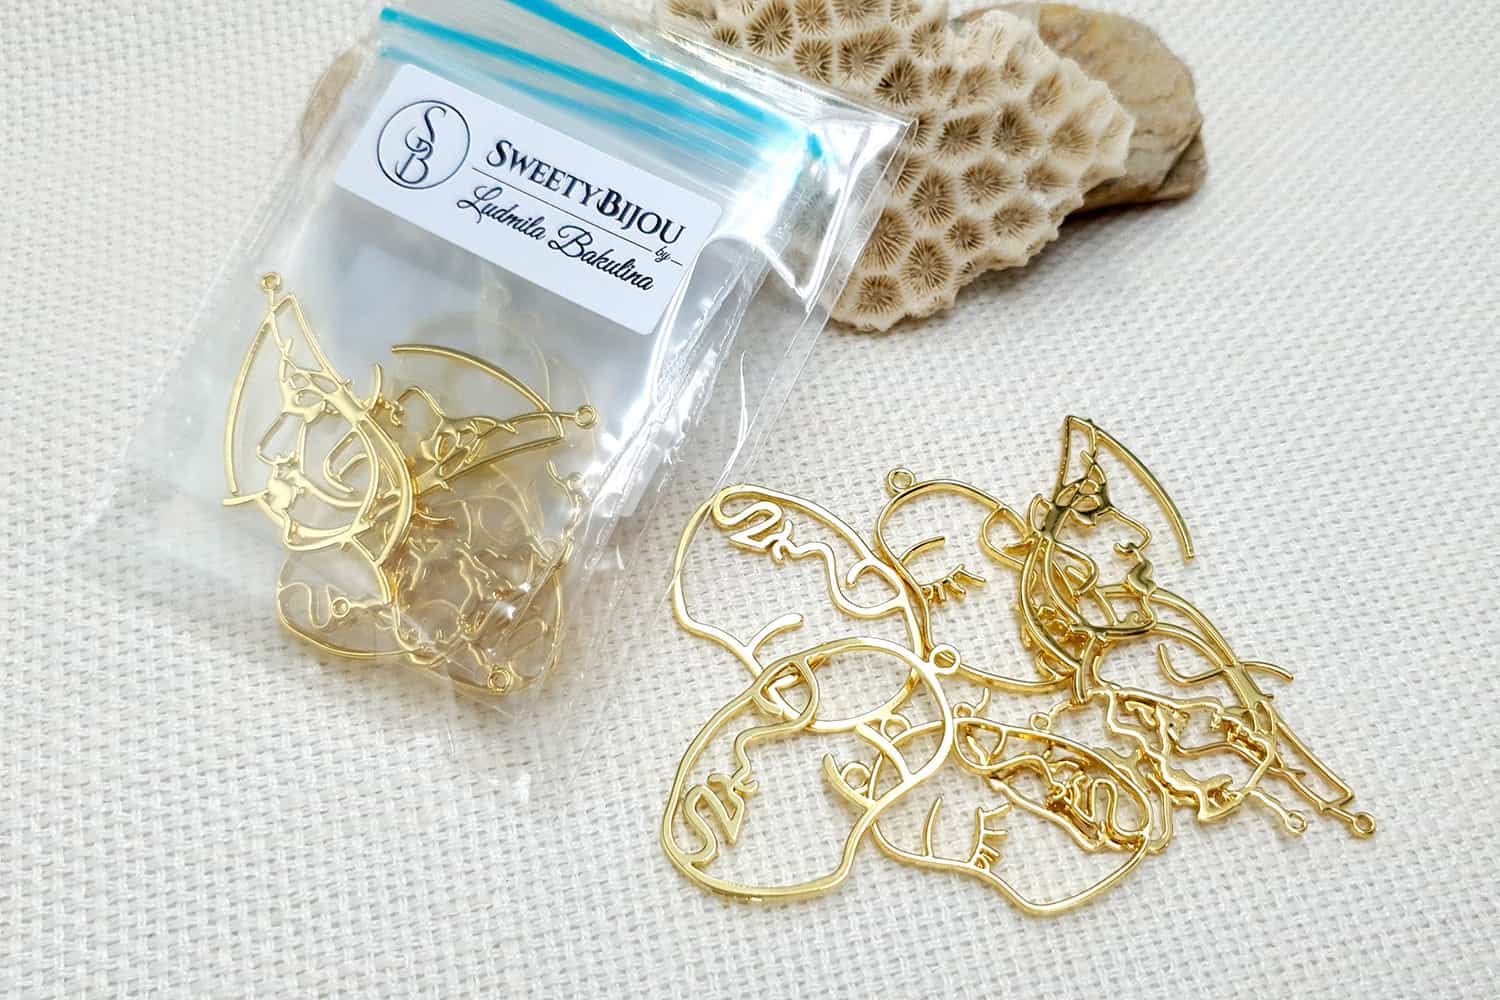 Faces - Set of 8pcs Golden Color Metal Jewelry Findings (22387)